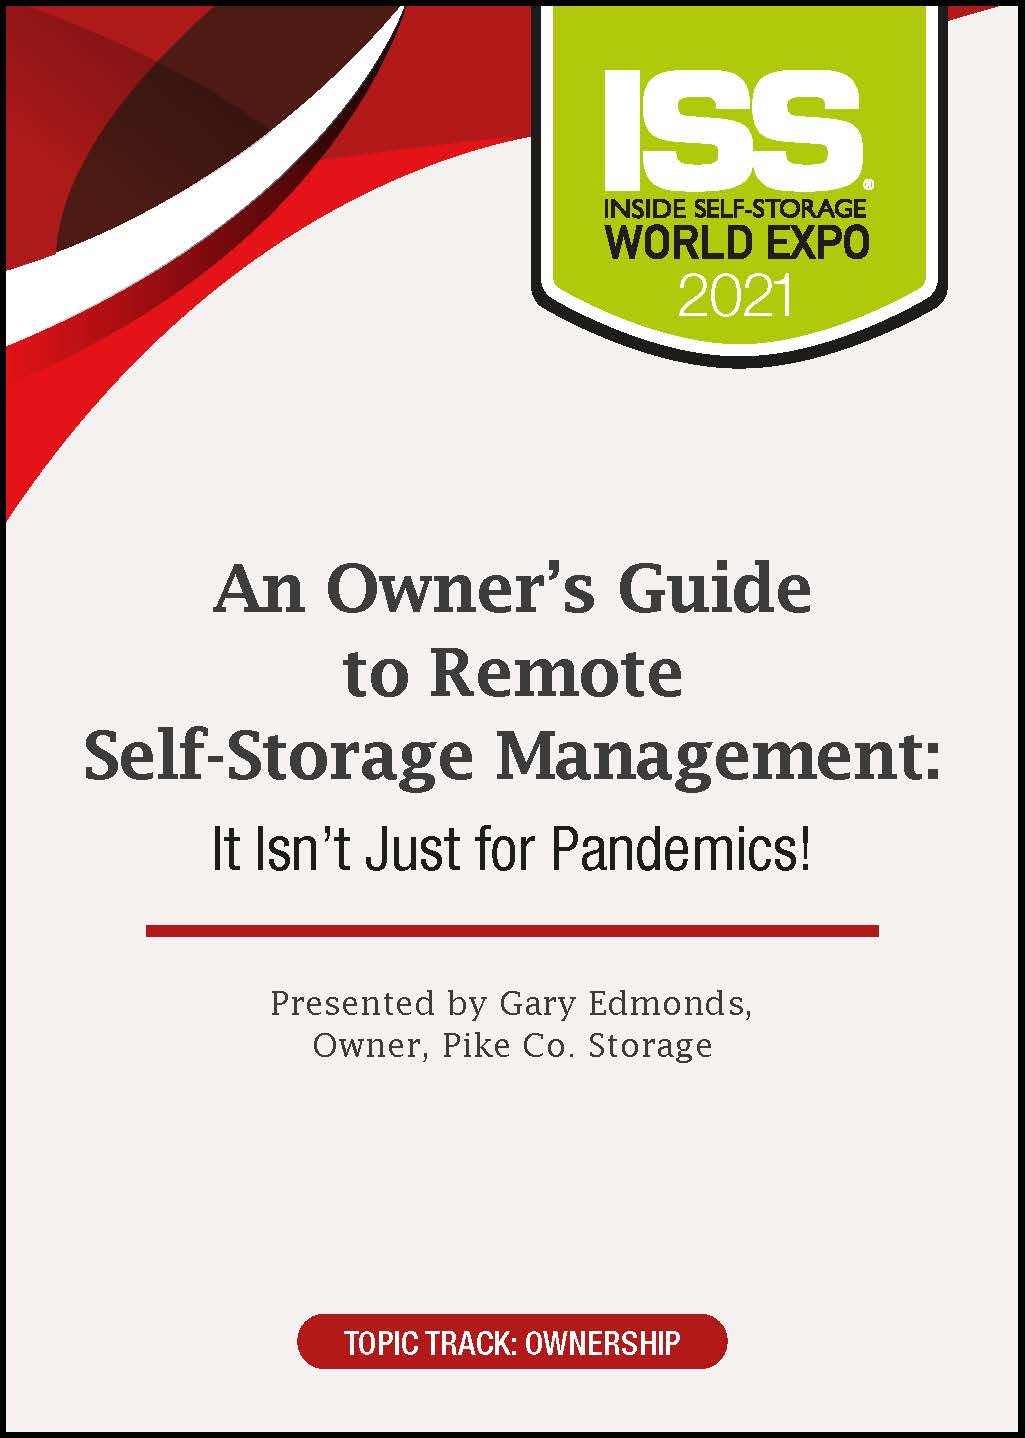 DVD - An Owner’s Guide to Remote Self-Storage Management: It Isn’t Just for Pandemics!